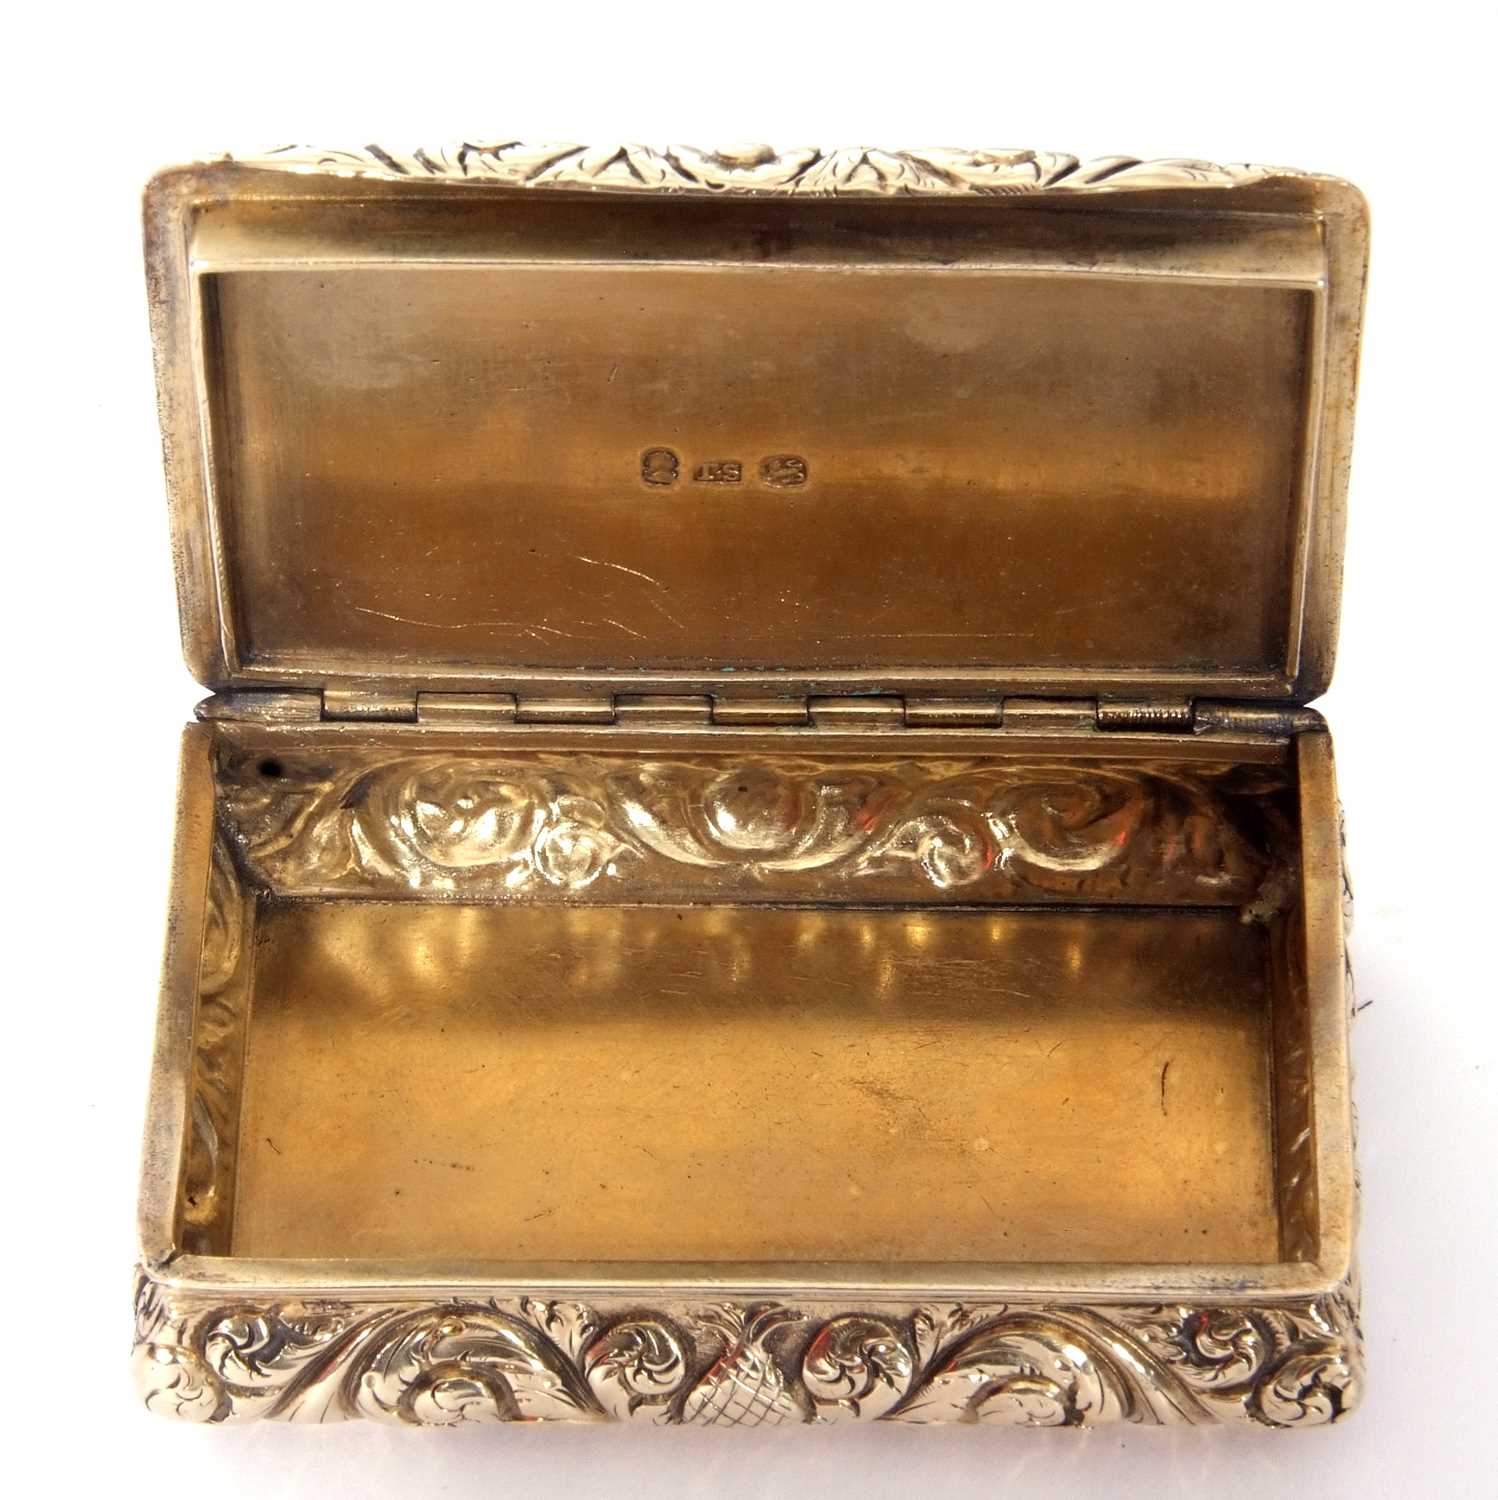 George IV heavy cast silver gilt snuff box of bombe sided rectangular form, the lid with raised - Image 7 of 8